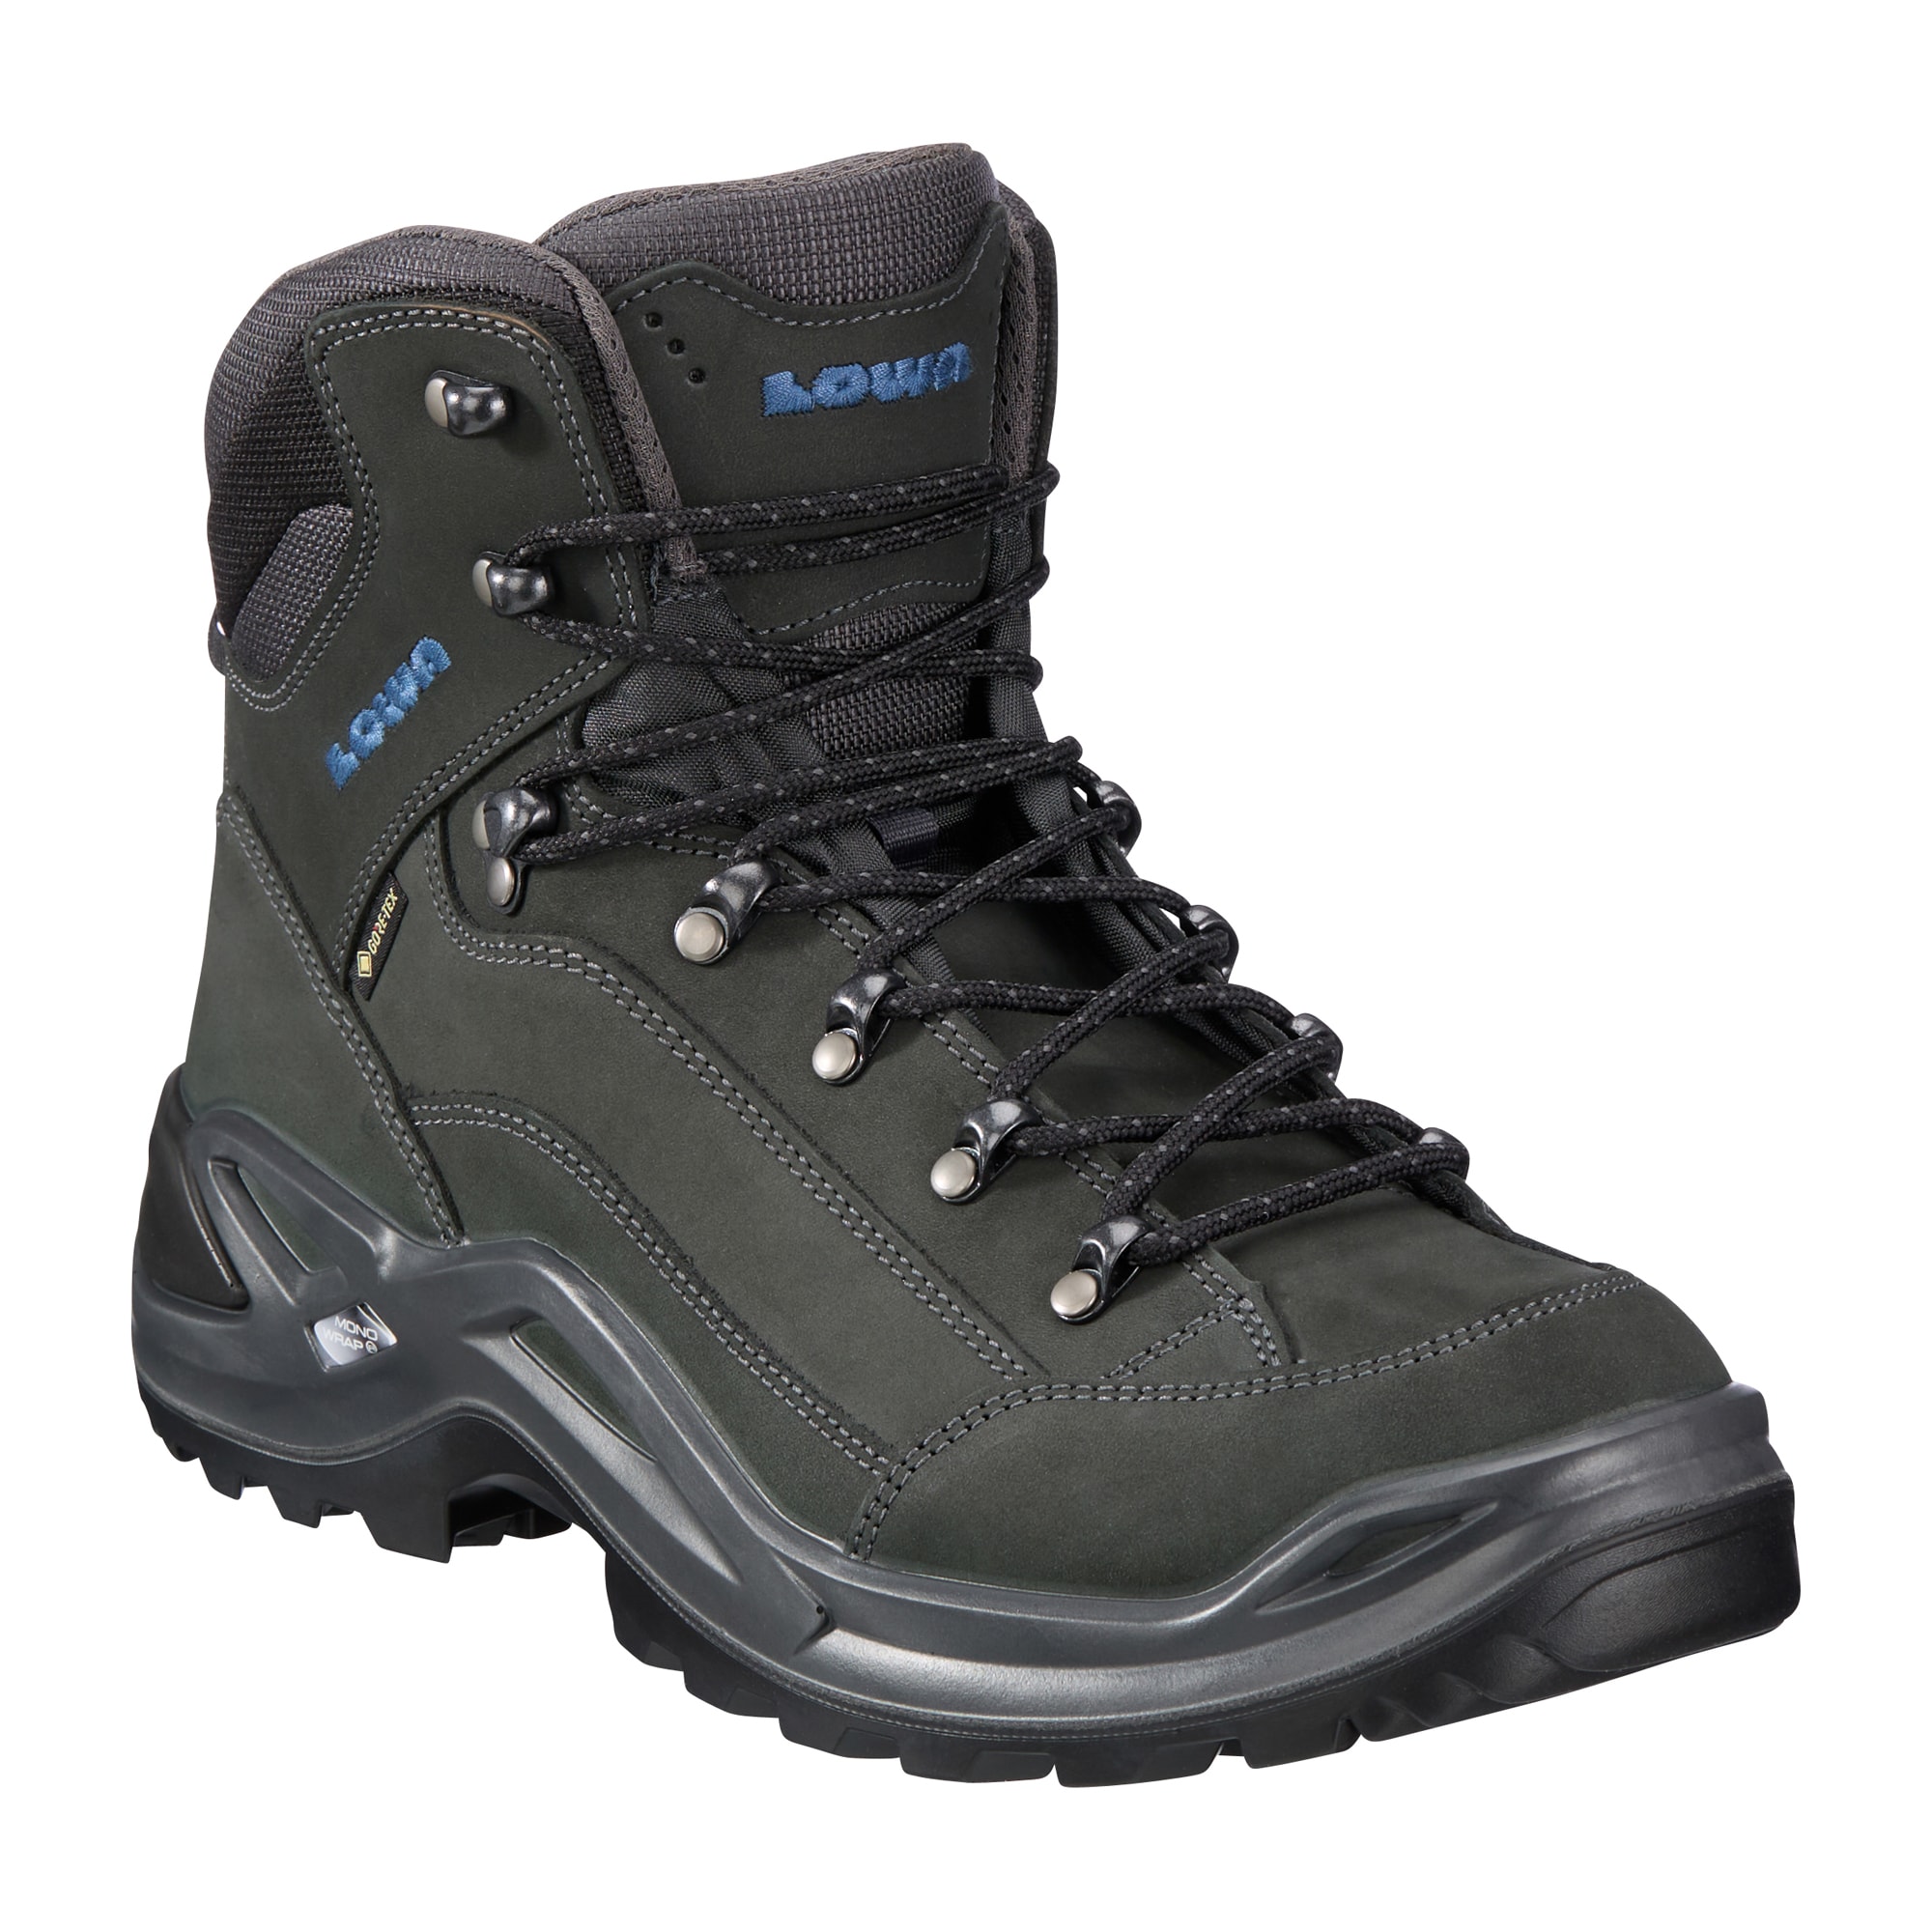 Oprecht Monet Downtown Purchase the LOWA Boots Renegade GTX Mid anthracite steel blue b